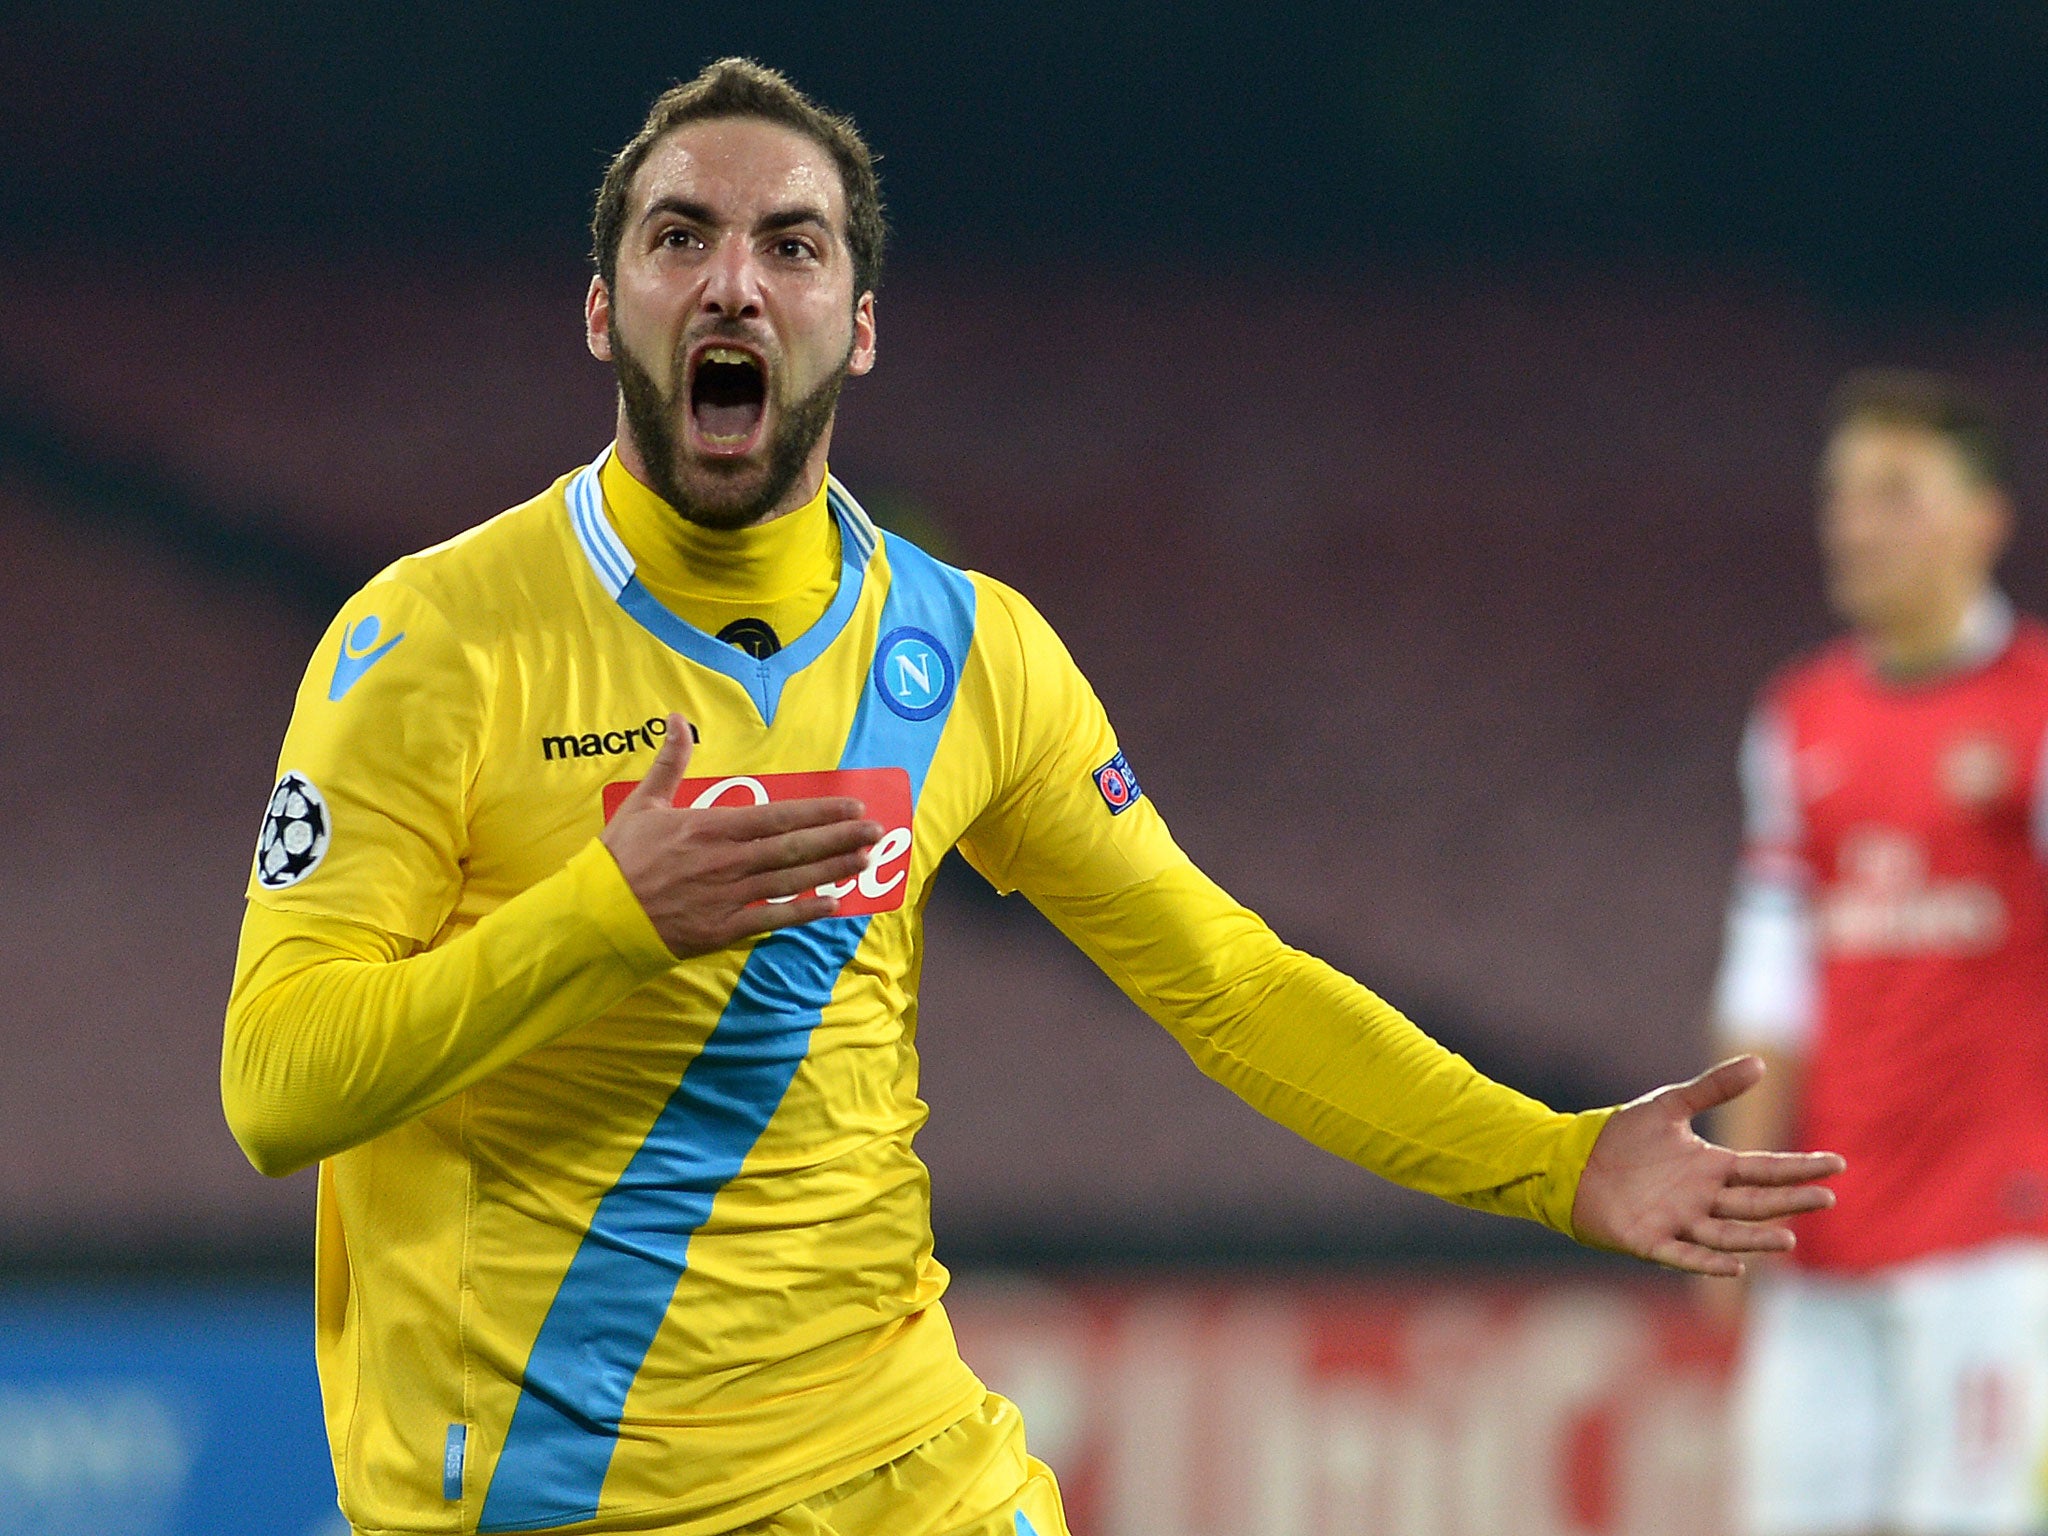 Napoli striker Gonzalo Higuain could be on his way to Chelsea